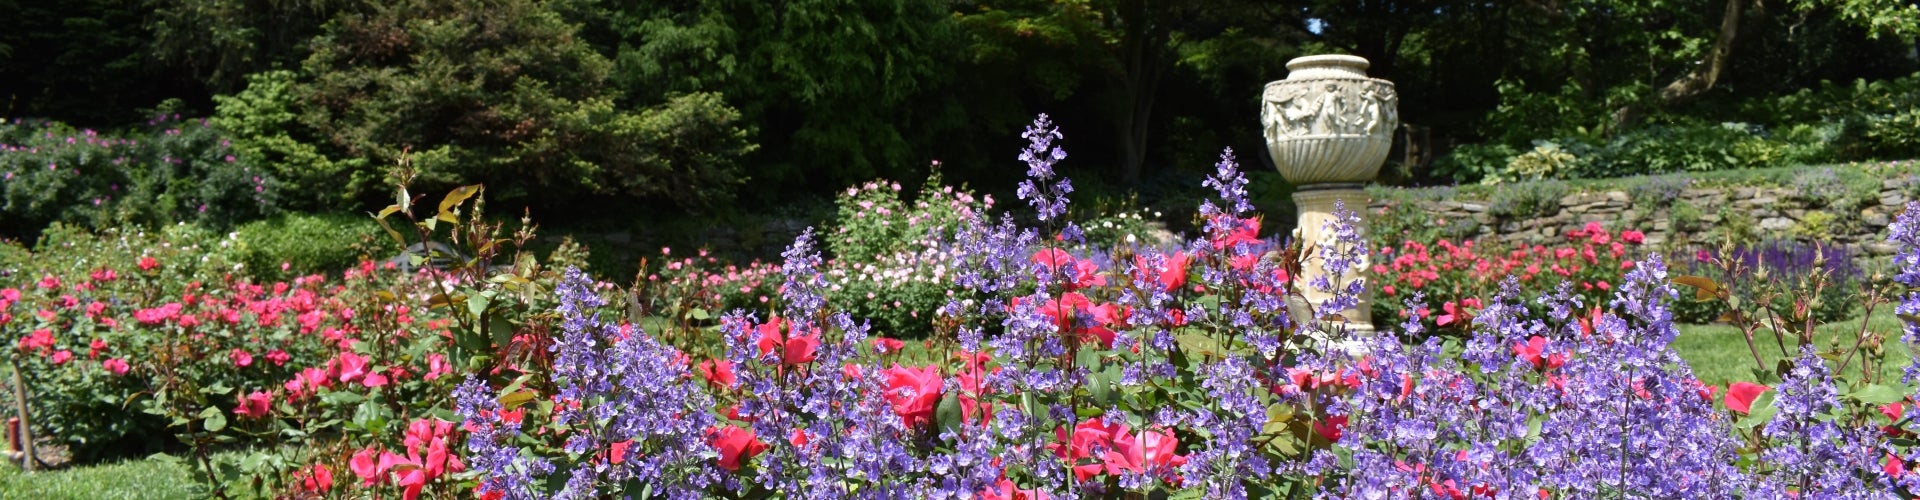 A ceramic sculpture stands to the right of pink rose bushes and purple flowers.